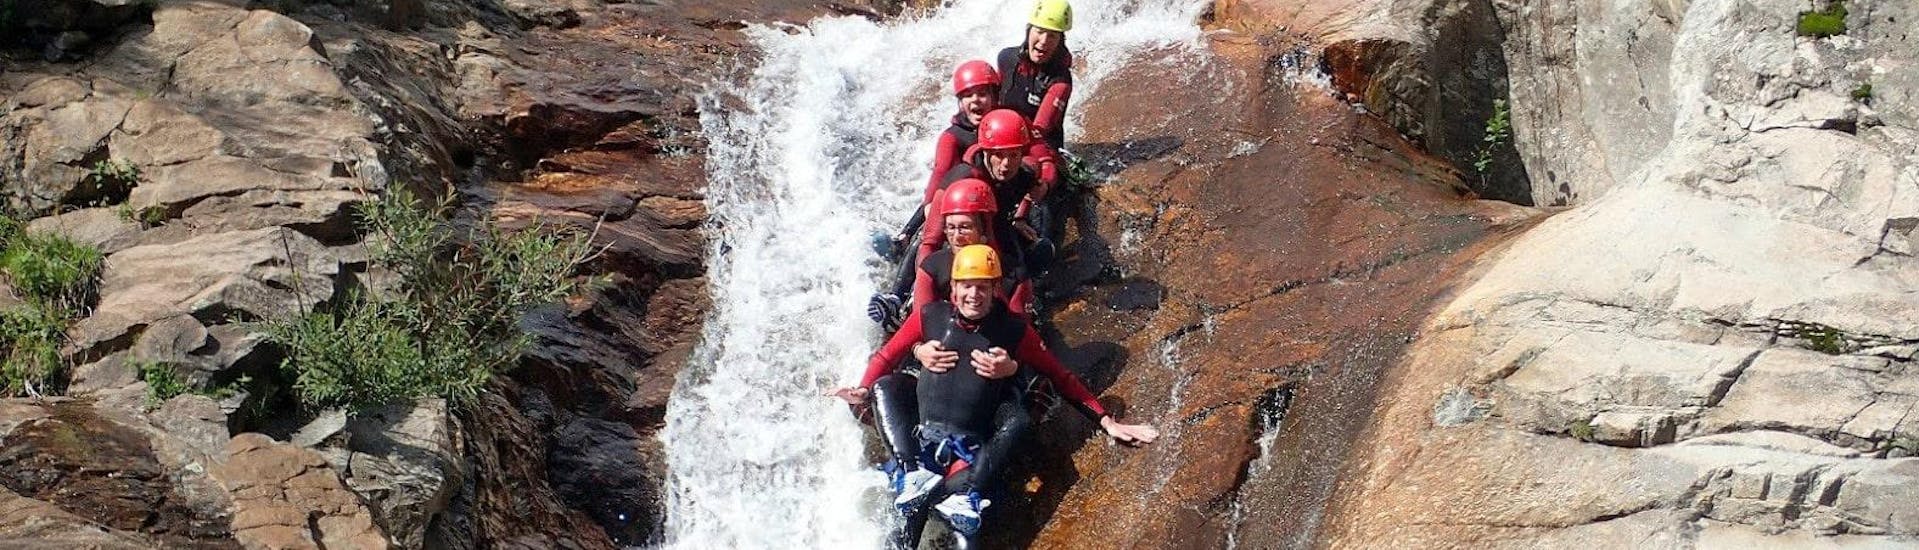 Canyoning facile - Gorges d'Héric.